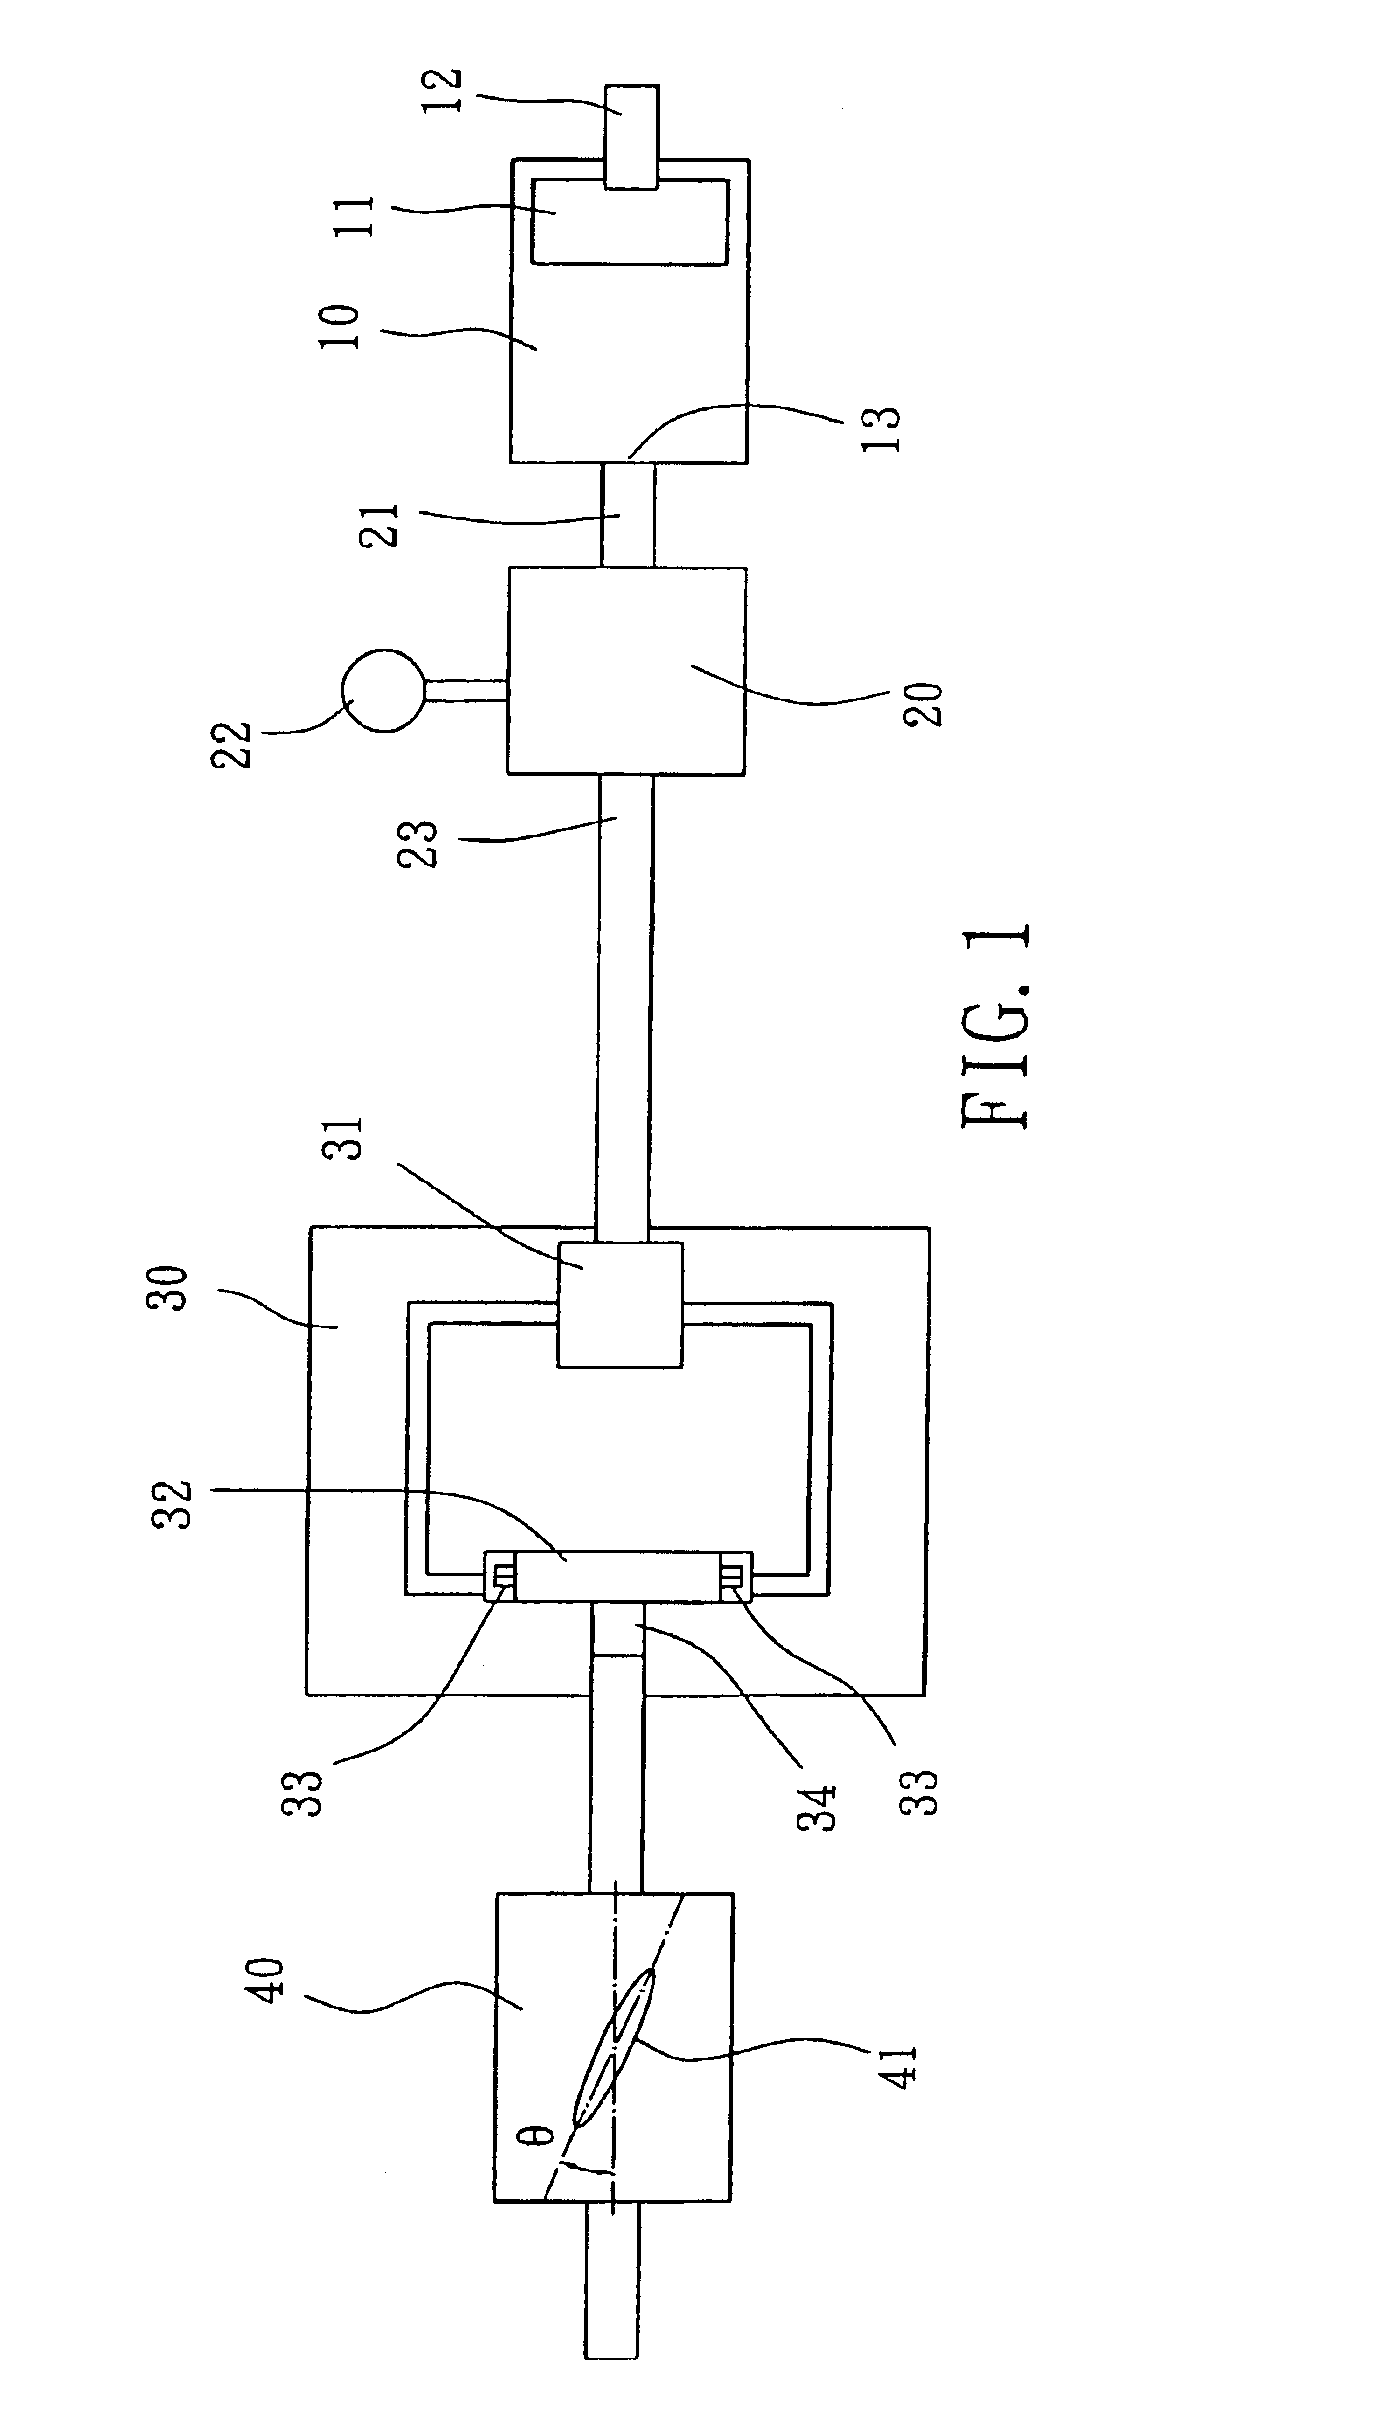 Nanomaterial processing system